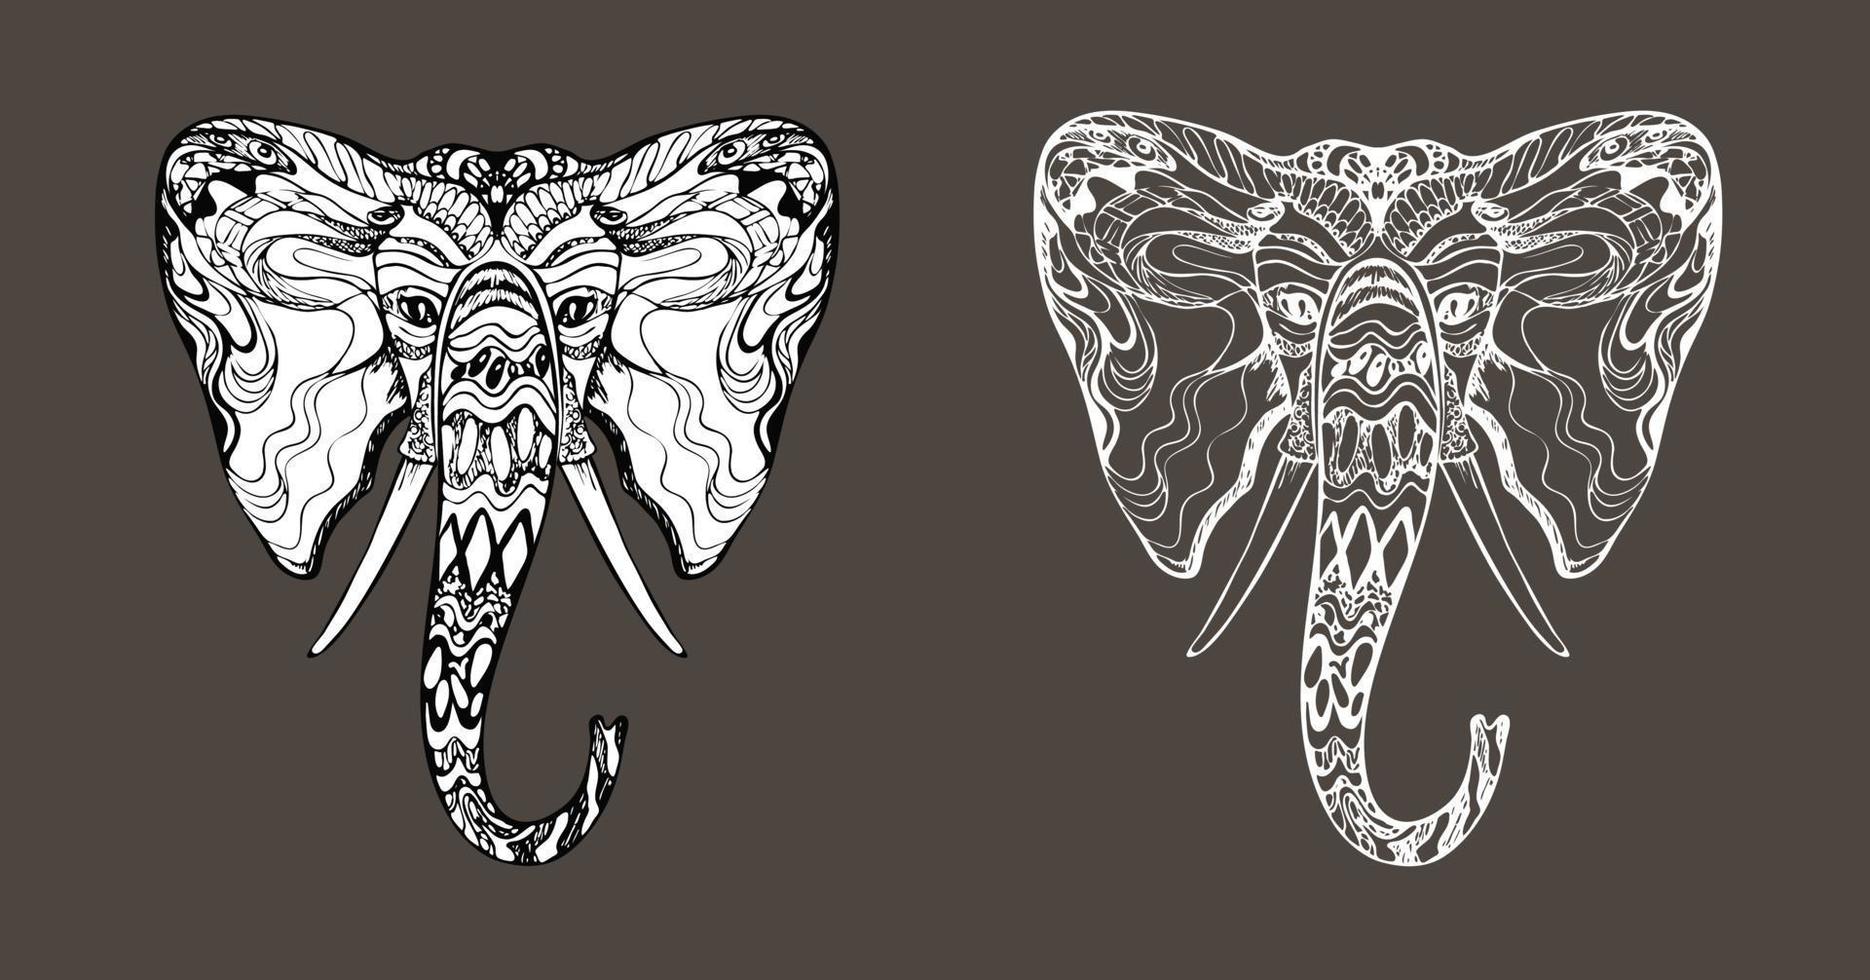 Stylish fancy tattoo hippie ornate elephant head, Ganesh face, unique hand drawn ethnic black outline, elegant contour, silhouette filled with white, animal safari design, prints, coloring vector